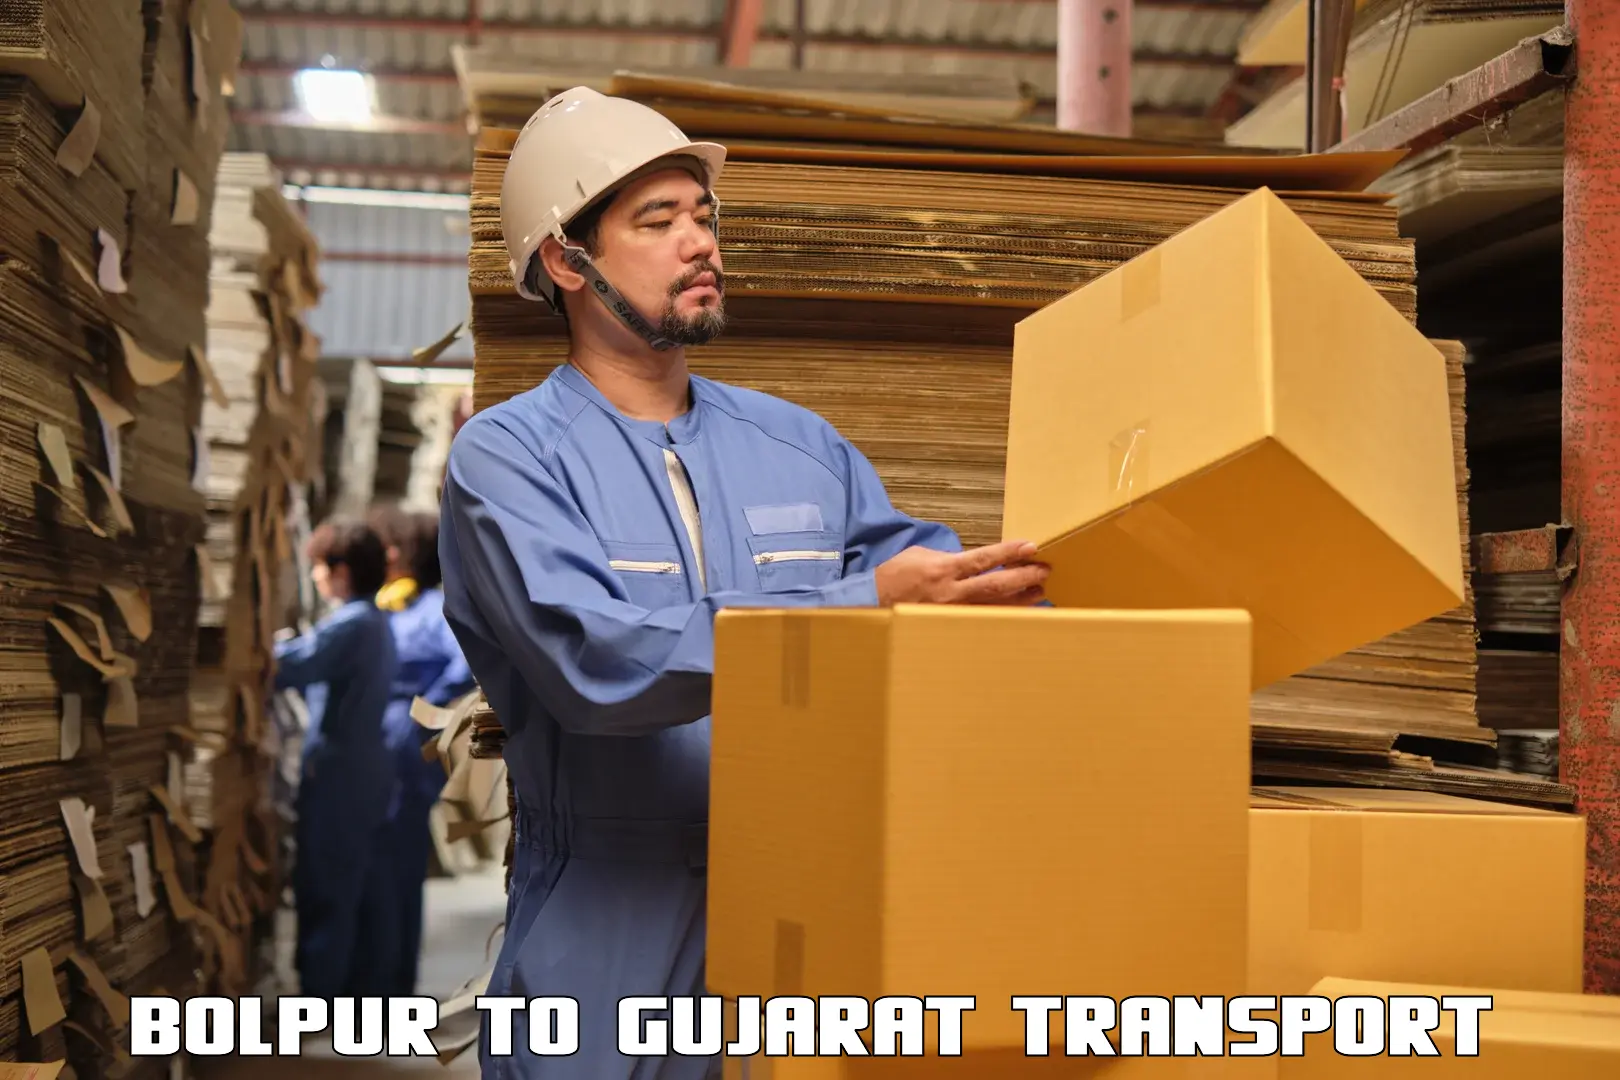 Goods delivery service Bolpur to Gujarat